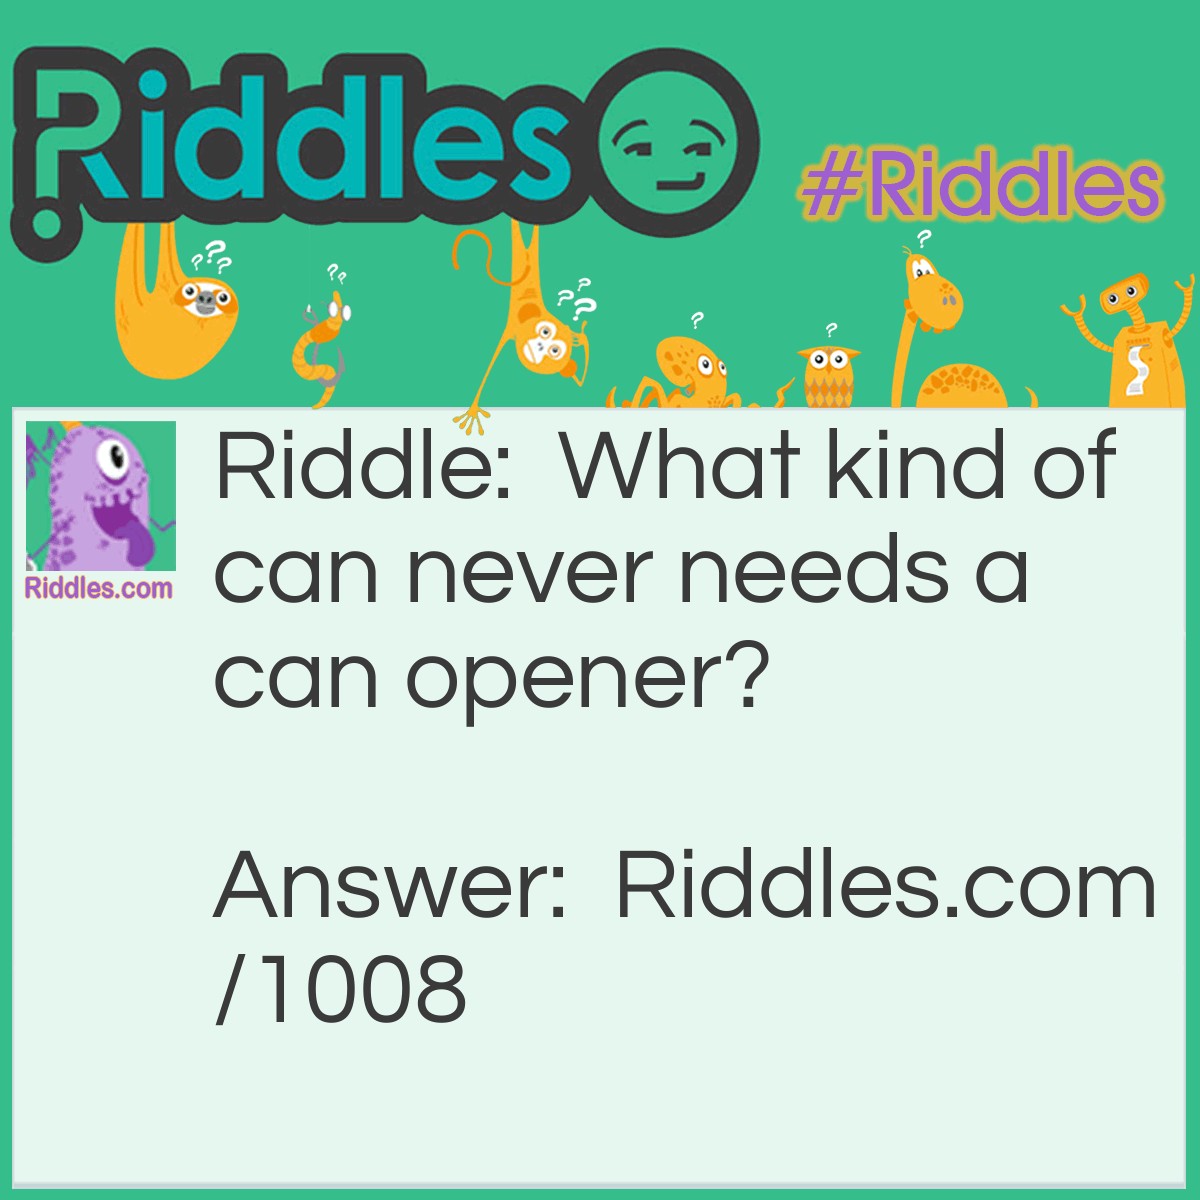 Riddle: What kind of can never needs a can opener? Answer: A Pelican